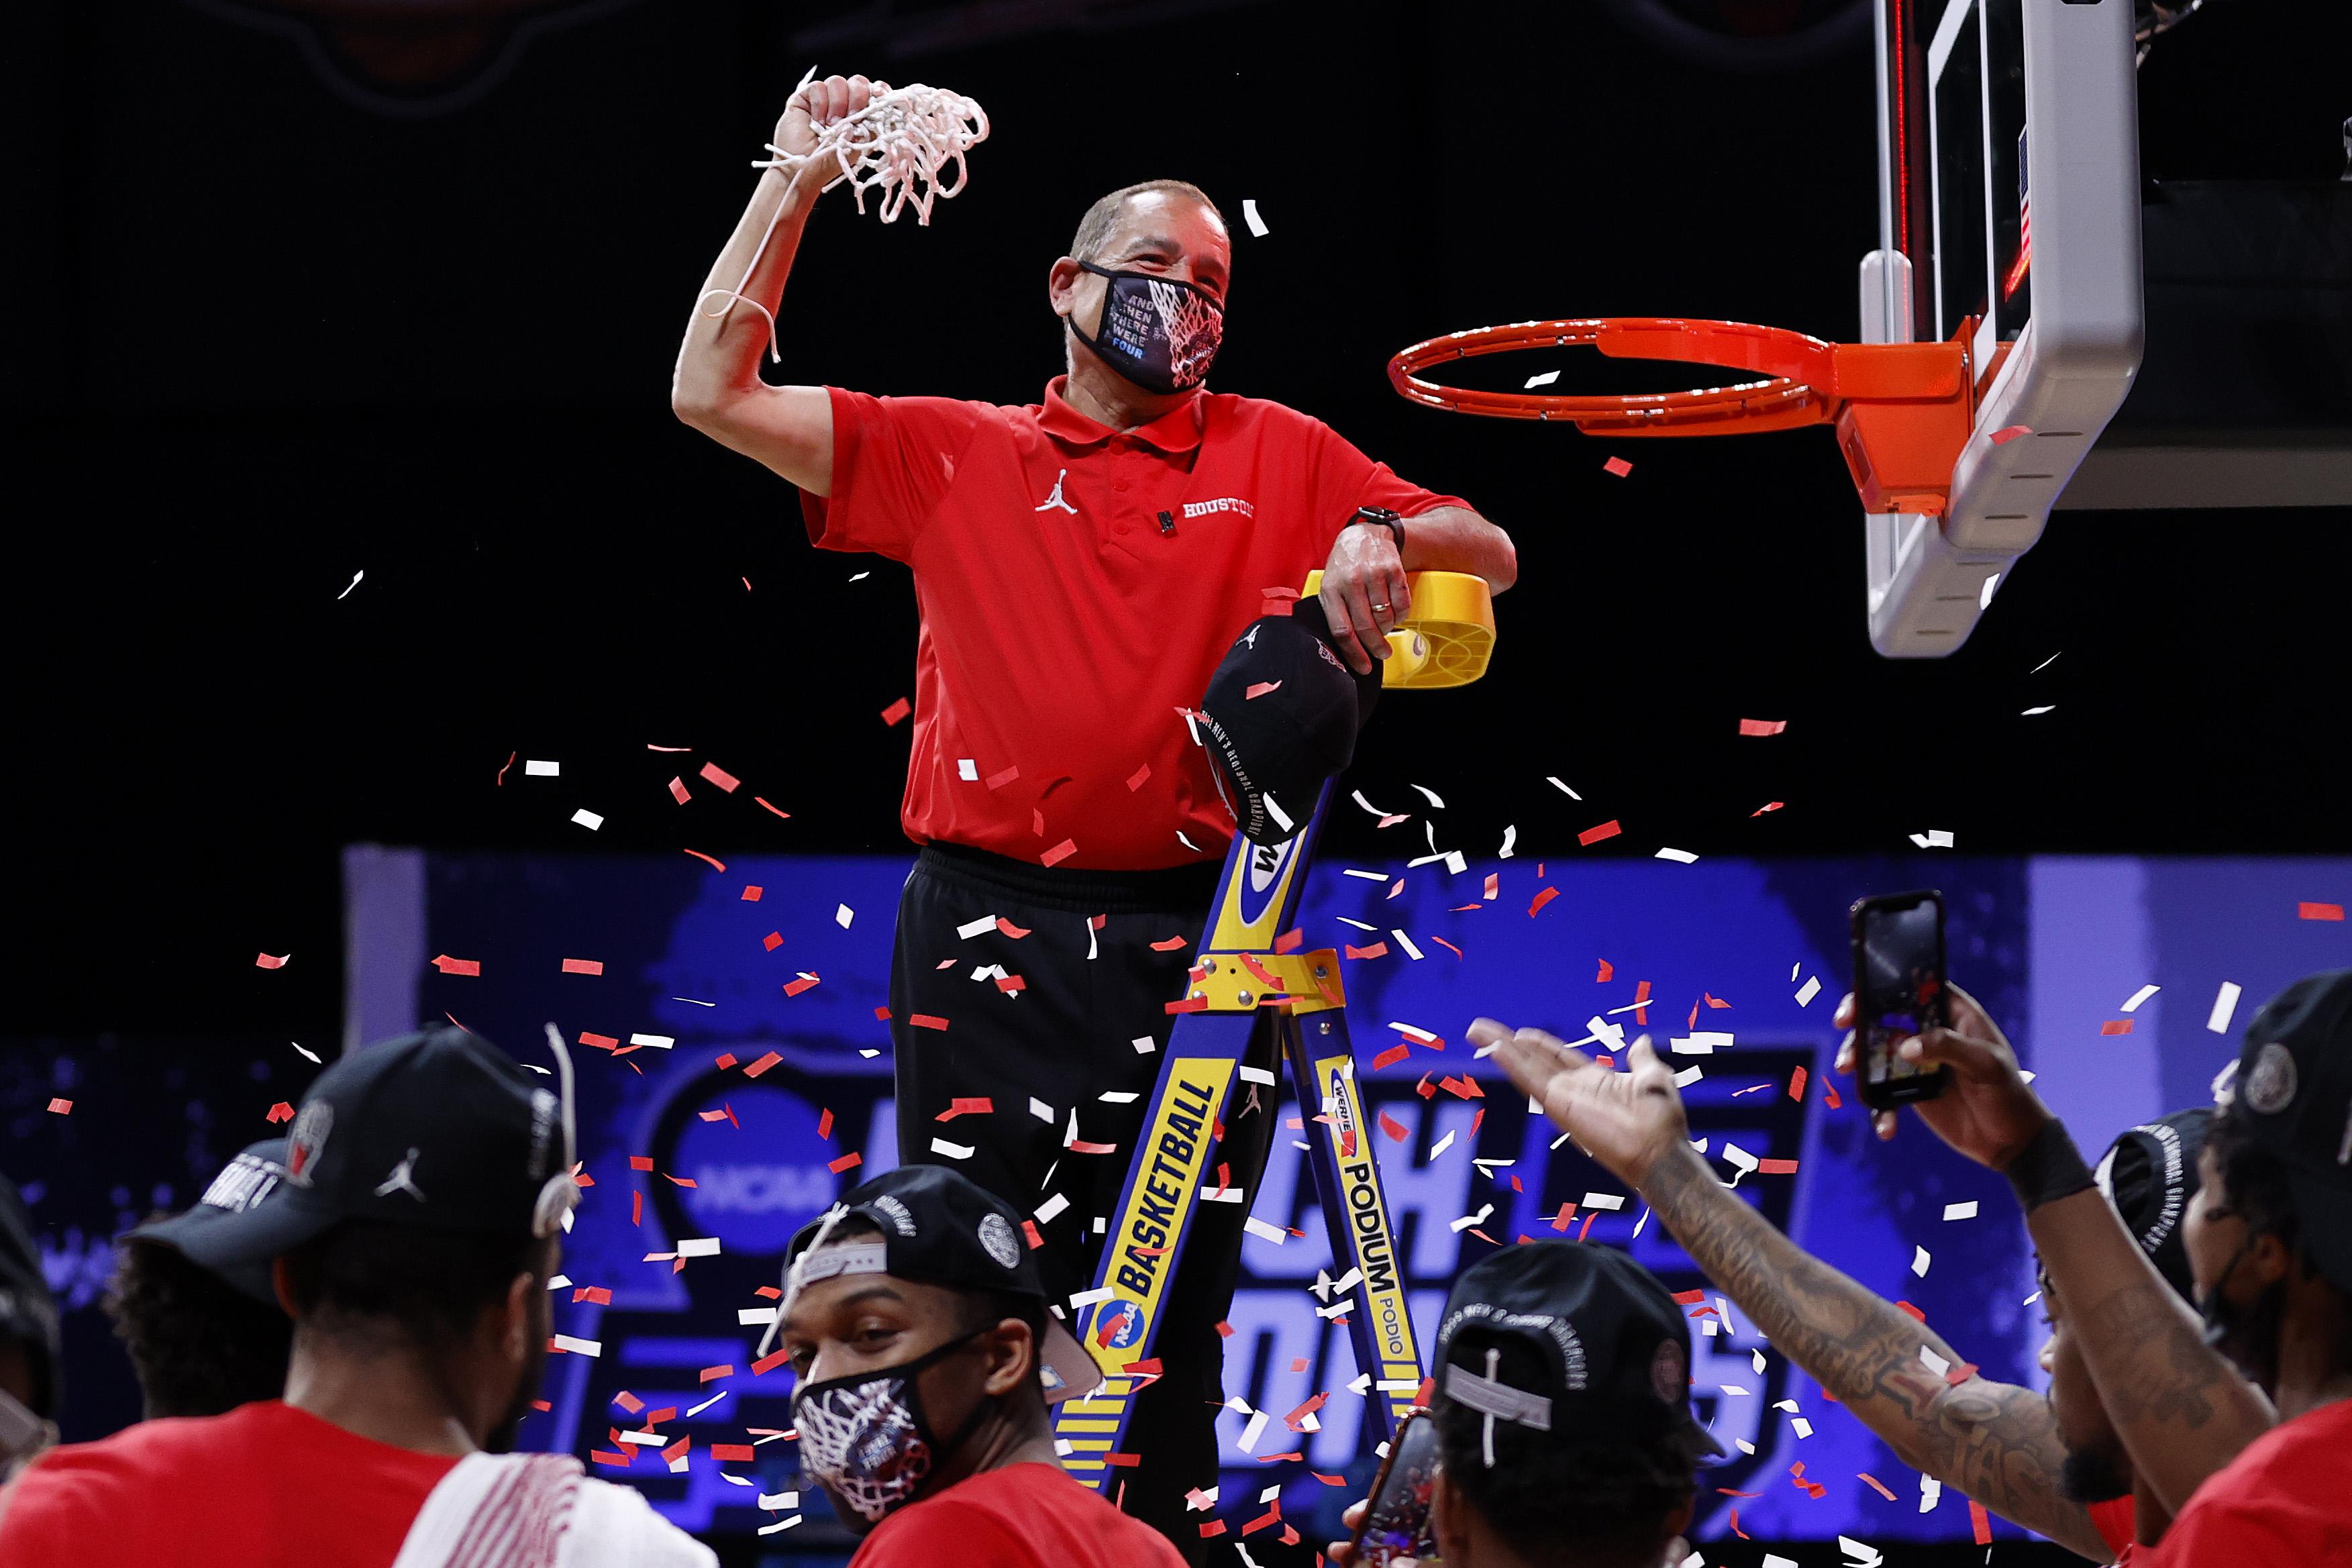 Houston coach Kelvin Sampson stands on a ladder and holds a net as confetti flies around him.